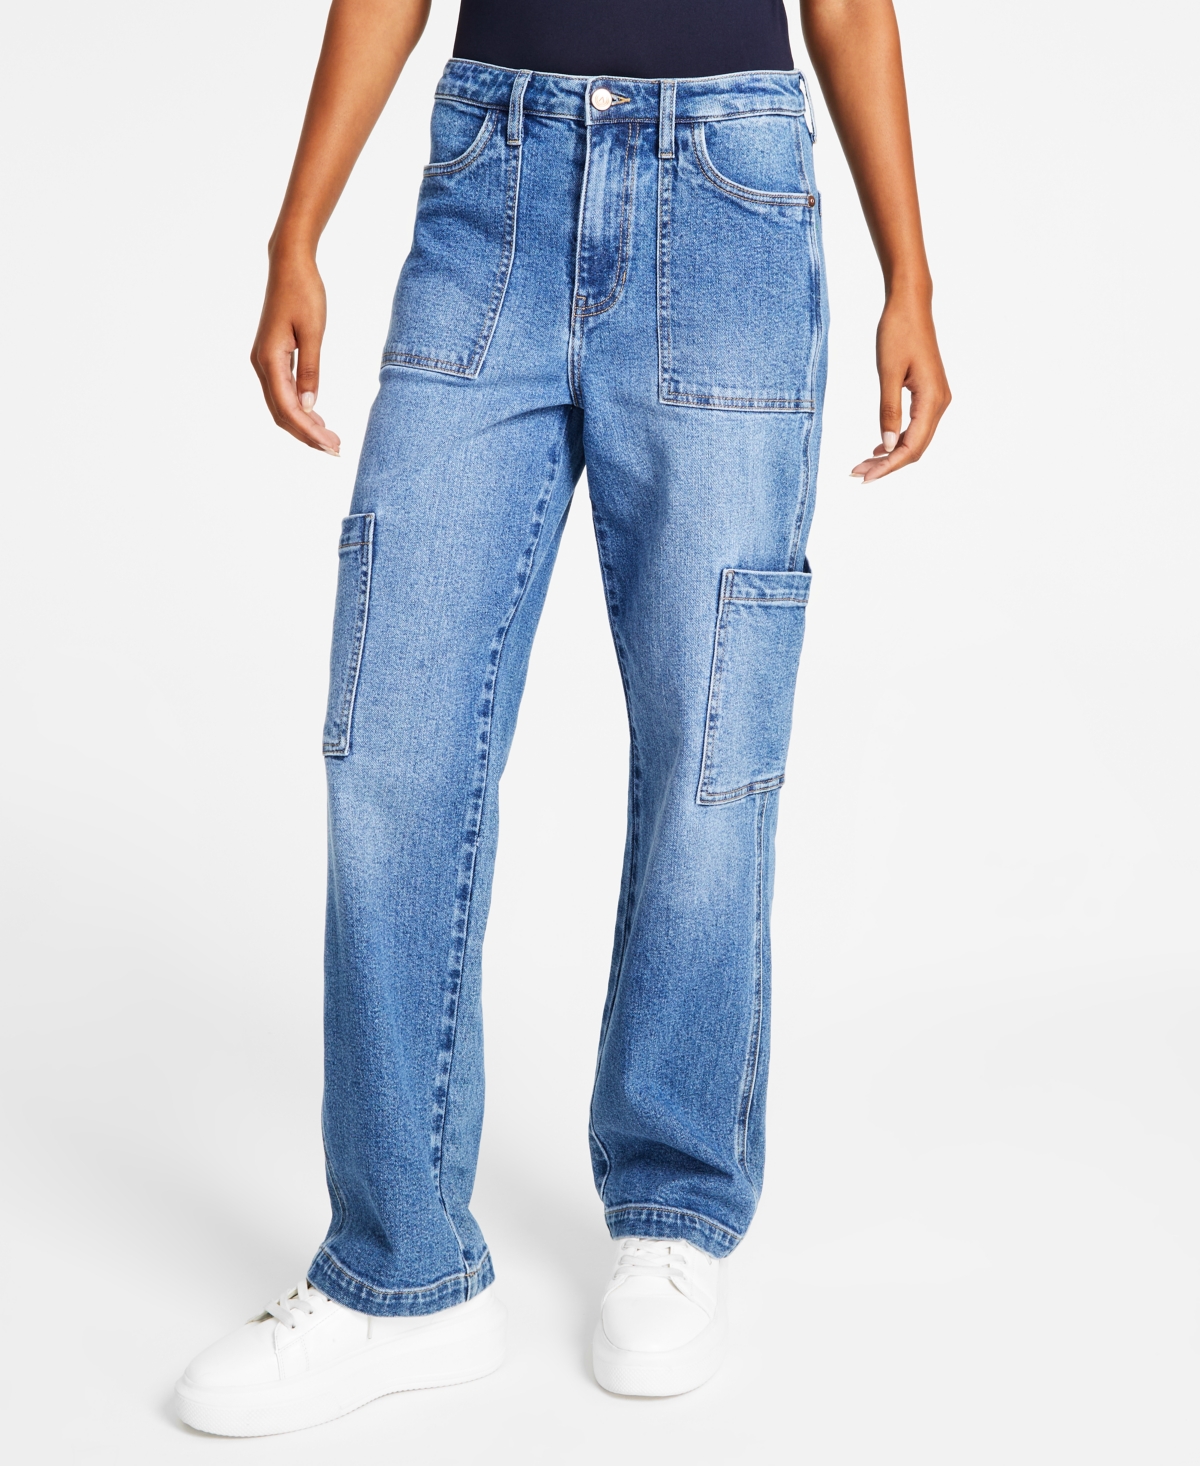  And Now This Women's High Rise Utility Denim Jeans